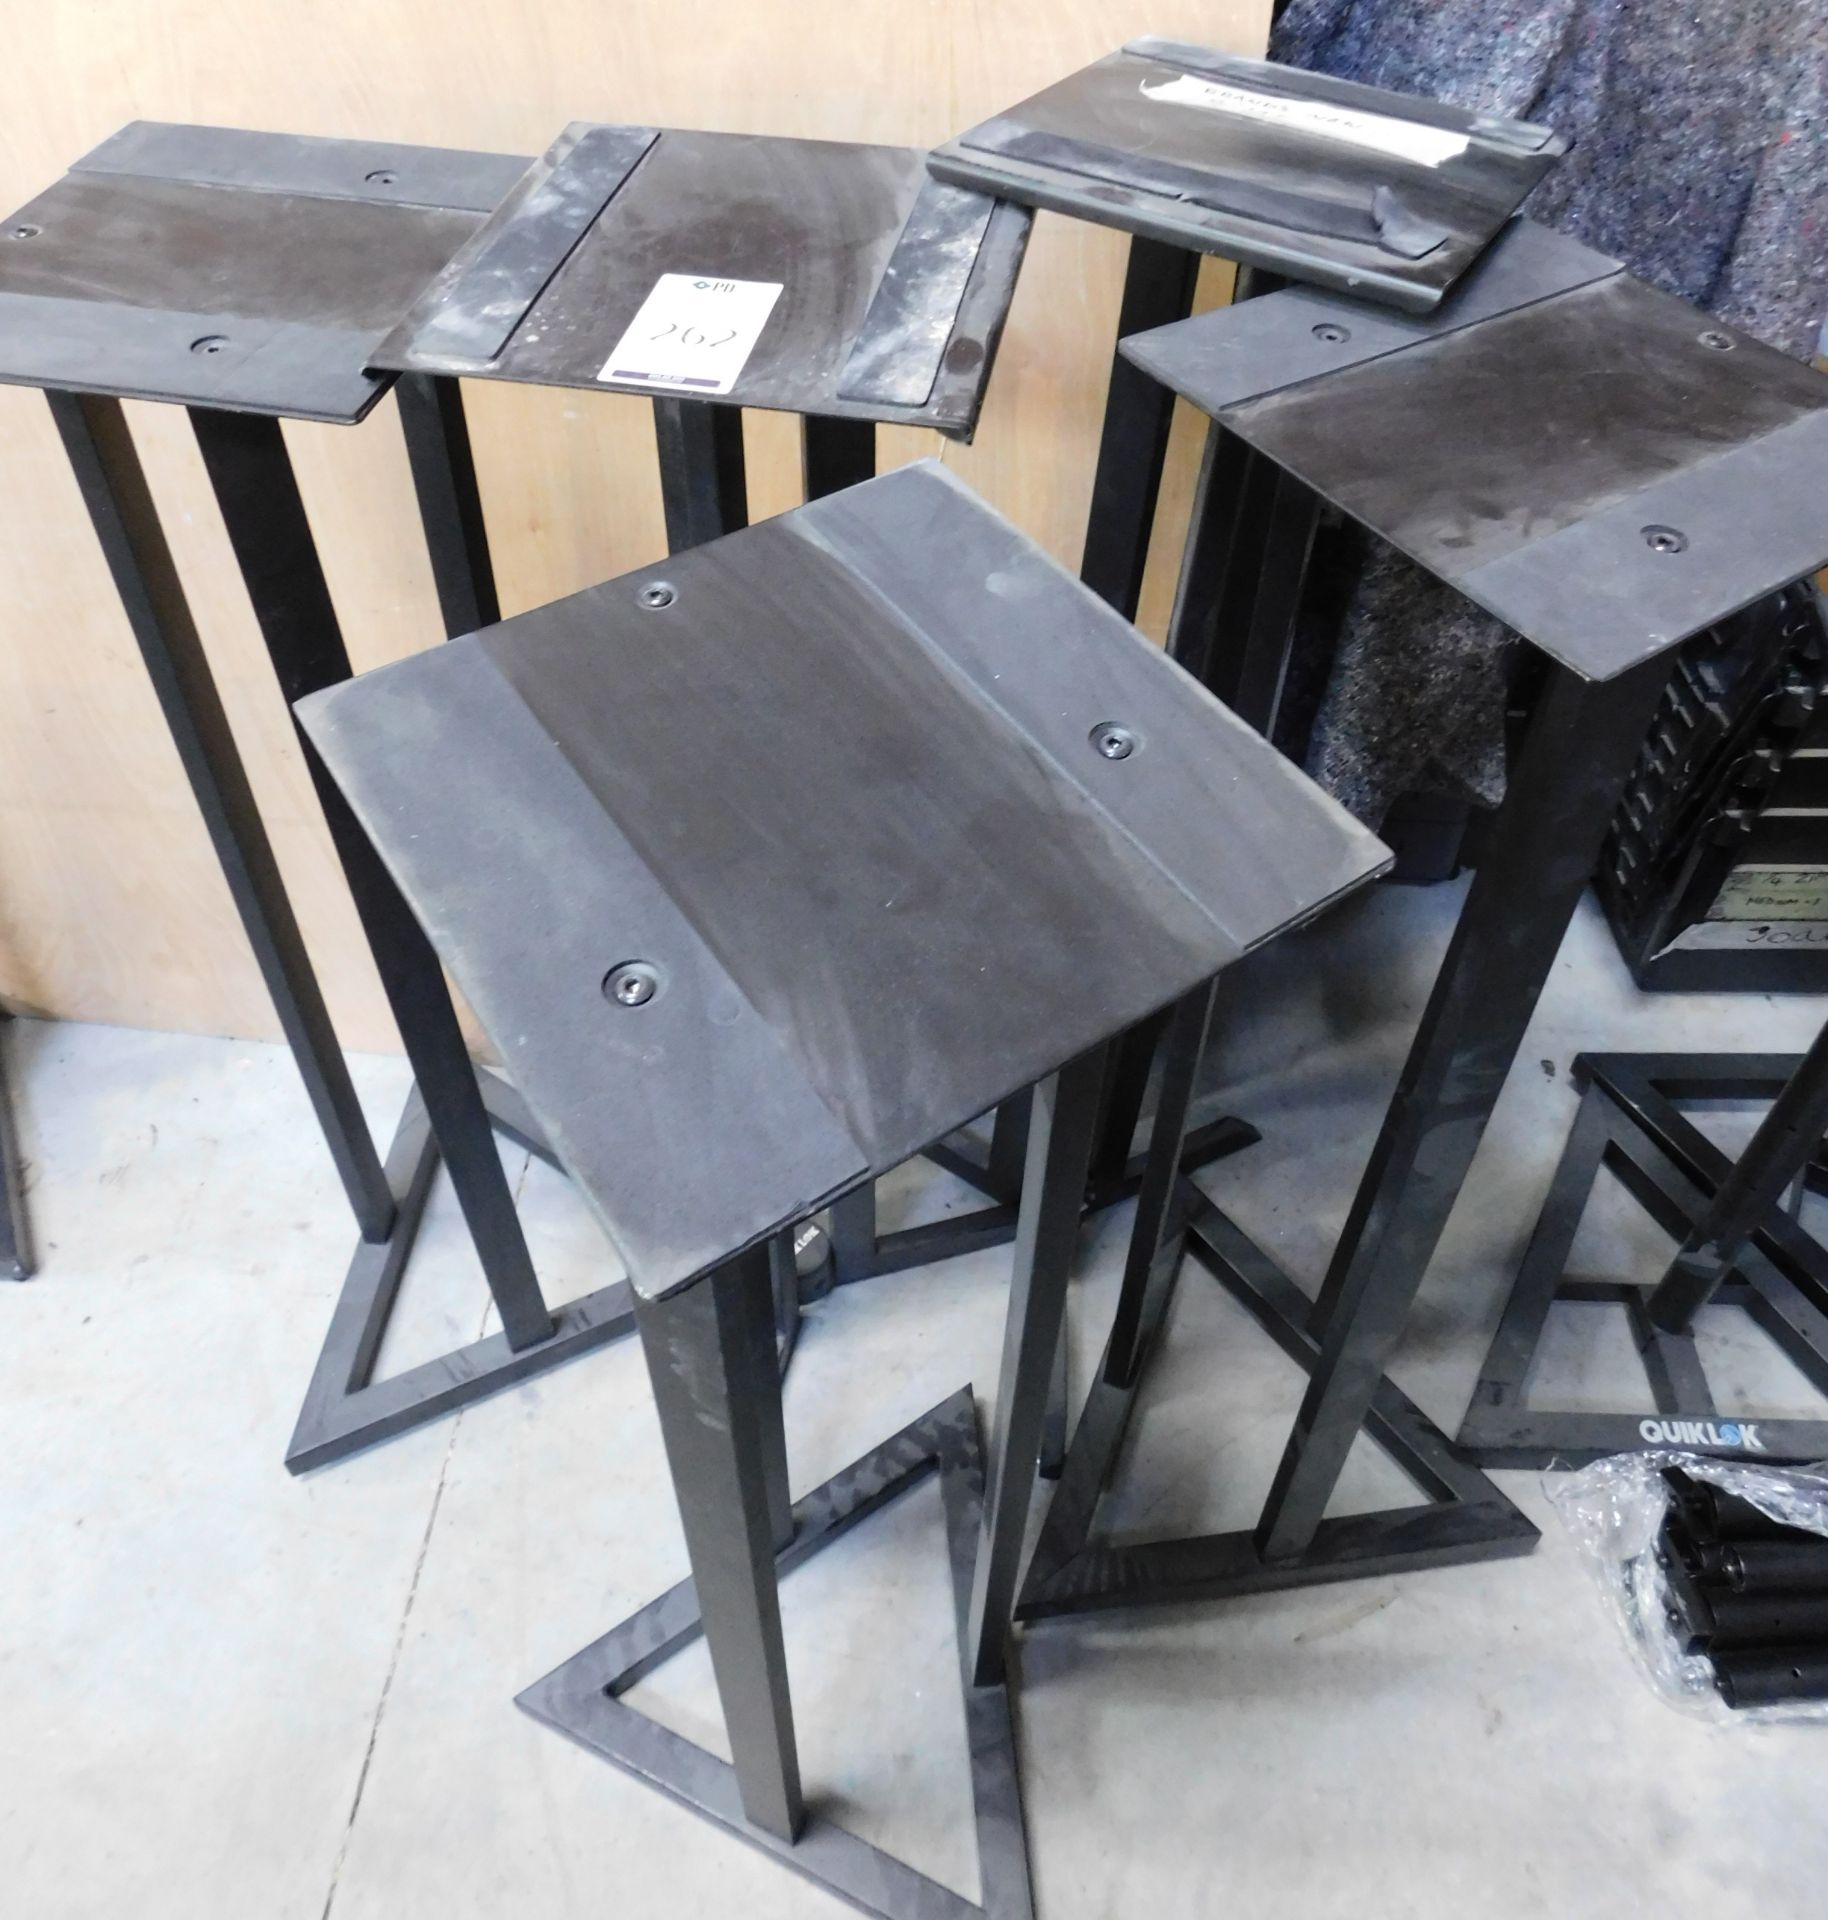 Five Quiklok Speaker Stands (Location Brentwood. Please Refer to General Notes)